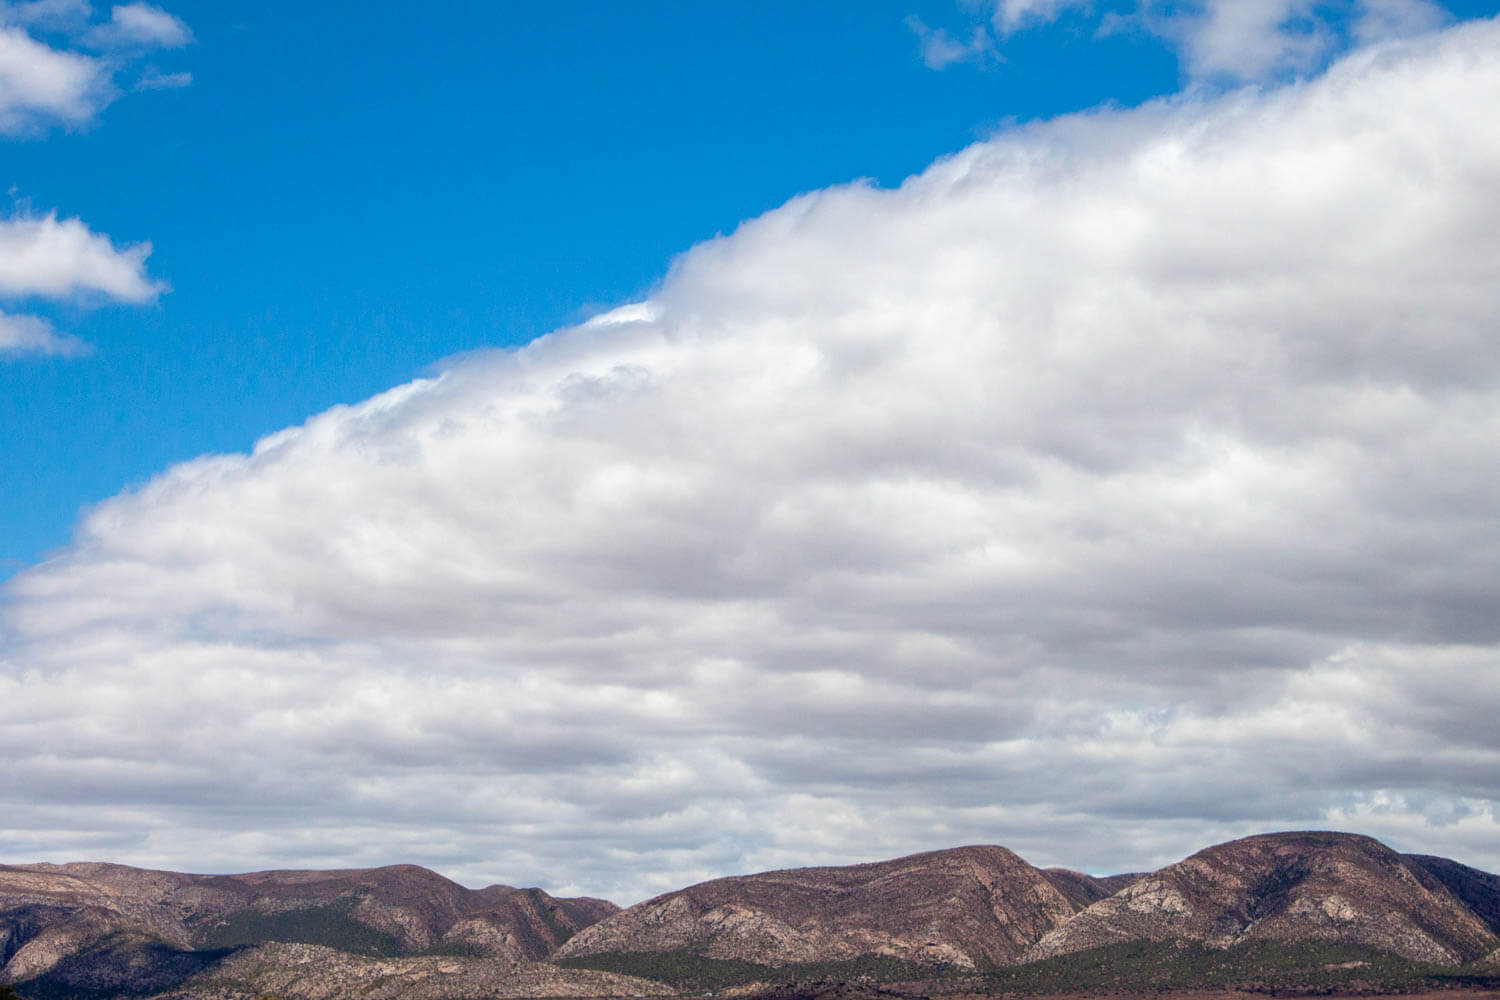 Cloud formation above desert mountains